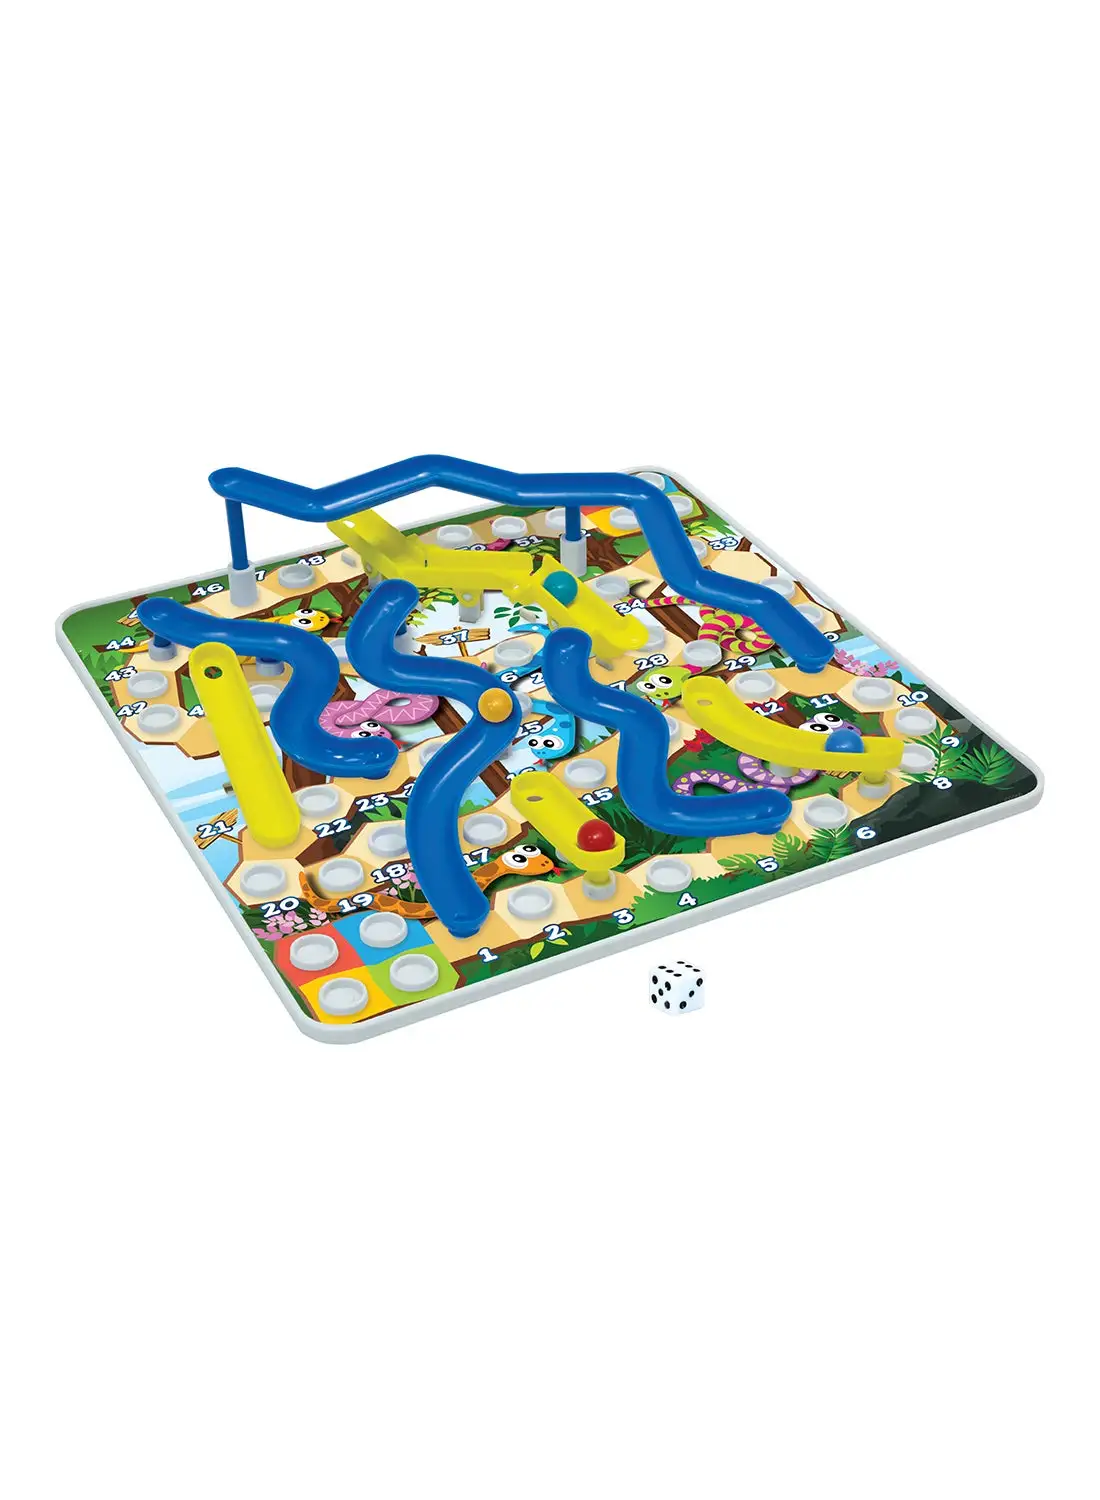 mumbo Jumbo 3D Snakes And Ladders Game Of Fun And Excitement For Kids 3 Years And Above